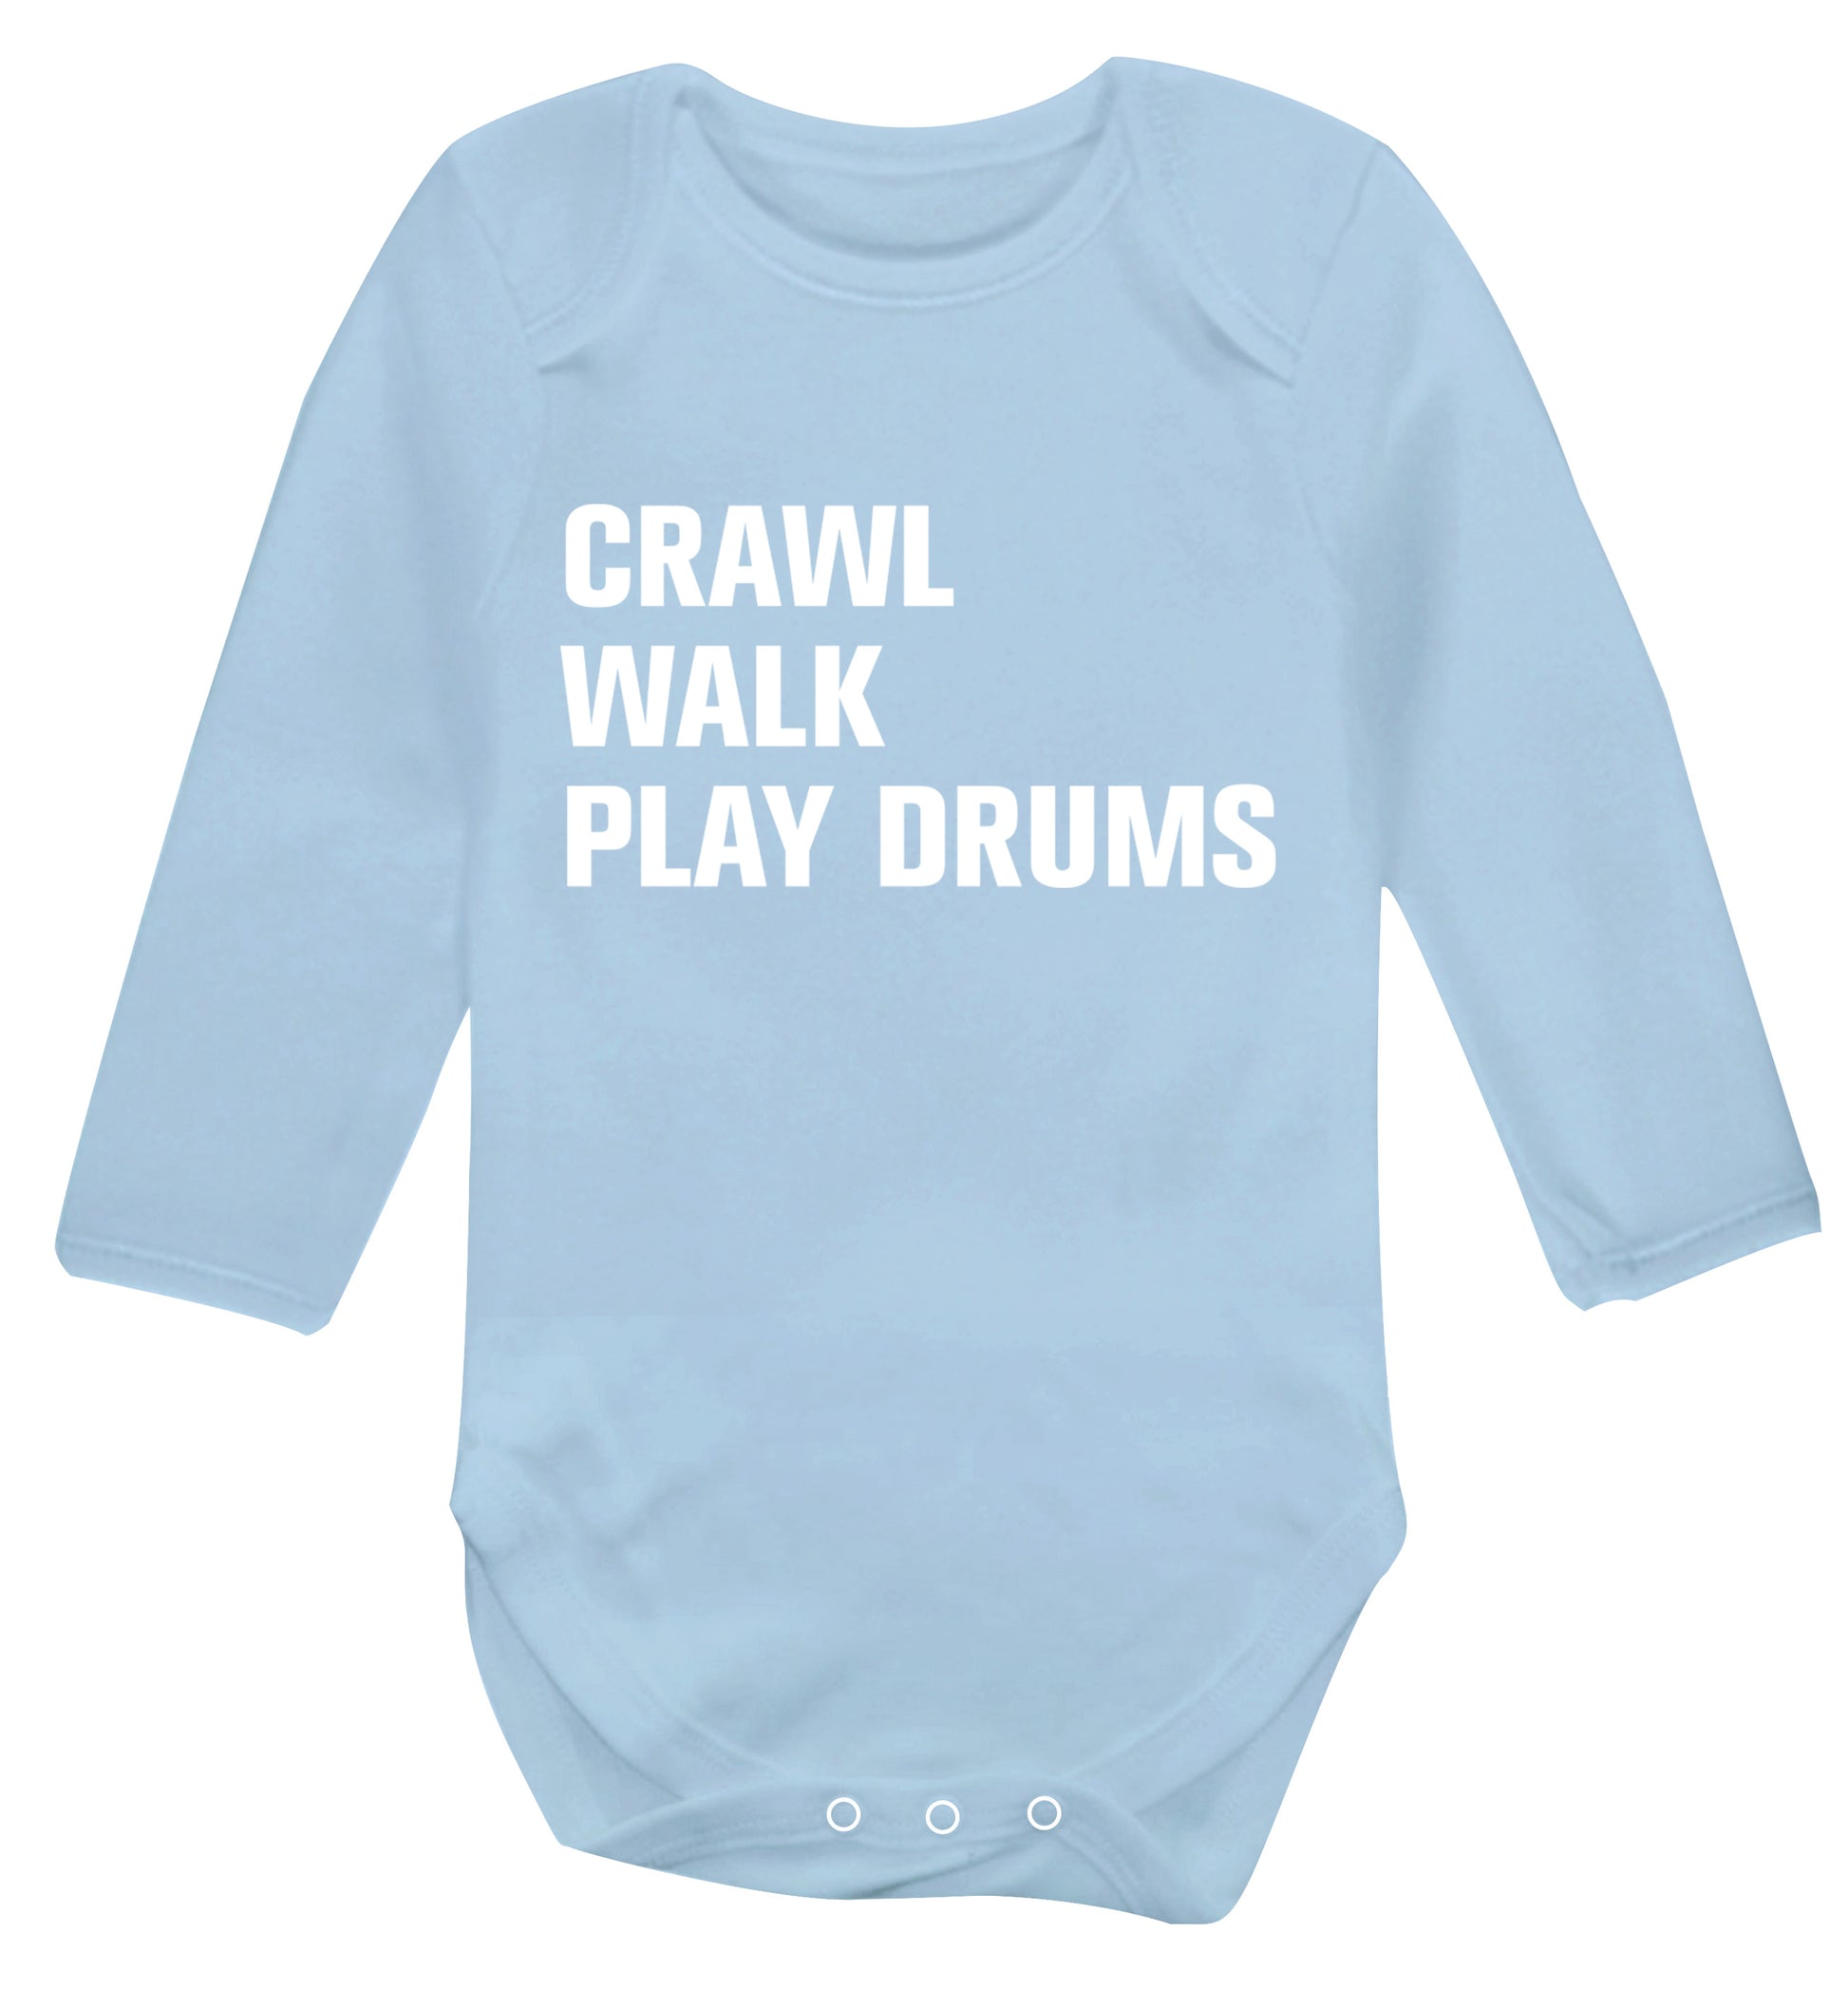 Crawl walk play drums Baby Vest long sleeved pale blue 6-12 months